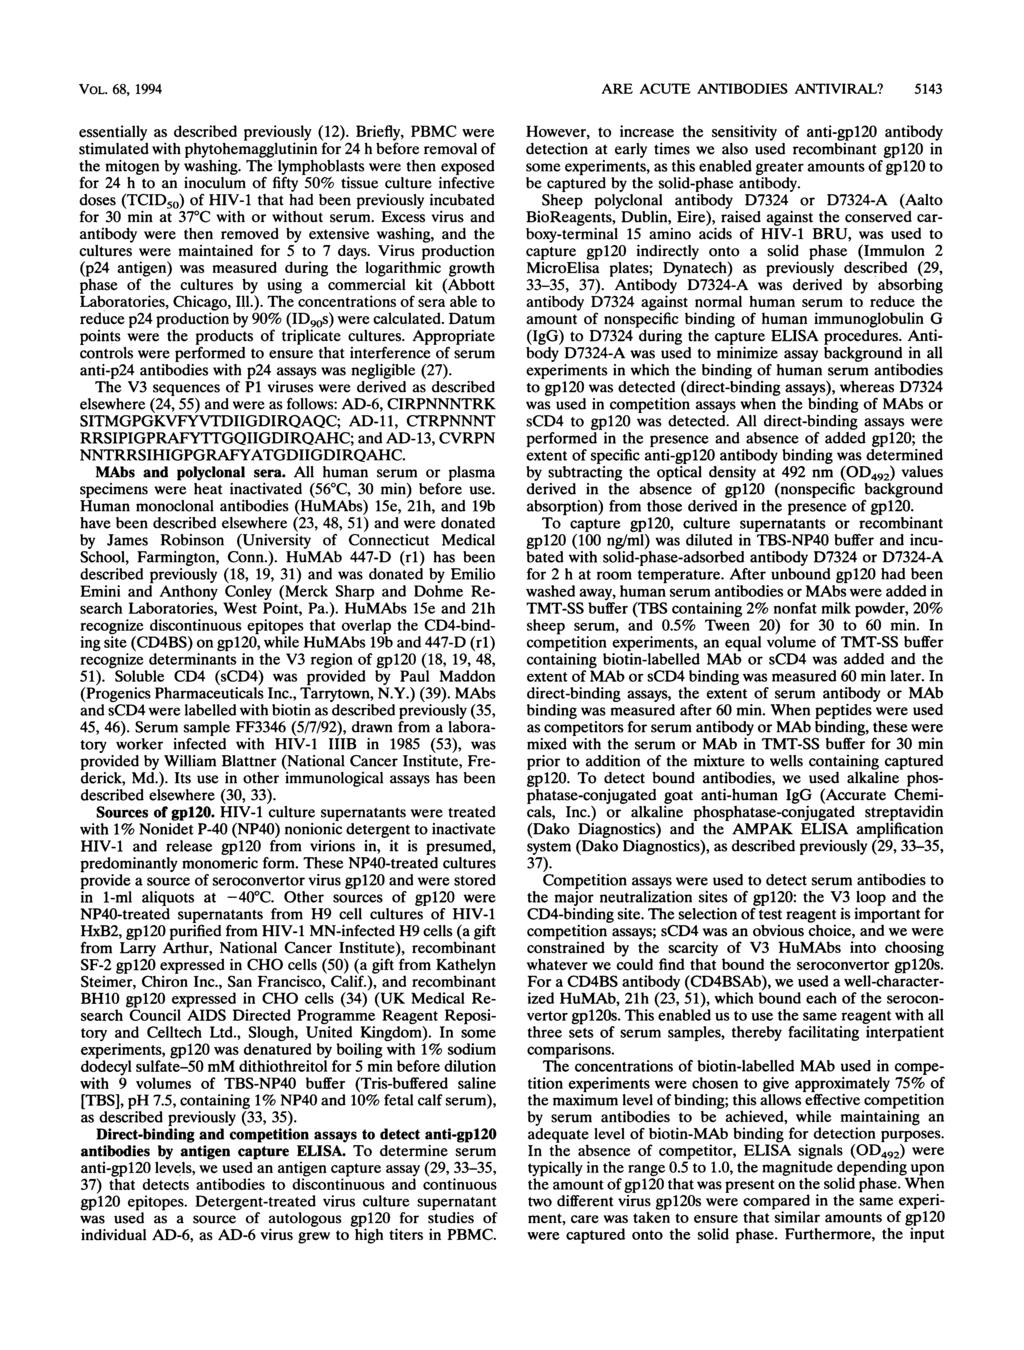 VOL. 68, 1994 essentially as described previously (12). Briefly, PBMC were stimulated with phytohemagglutinin for 24 h before removal of the mitogen by washing.